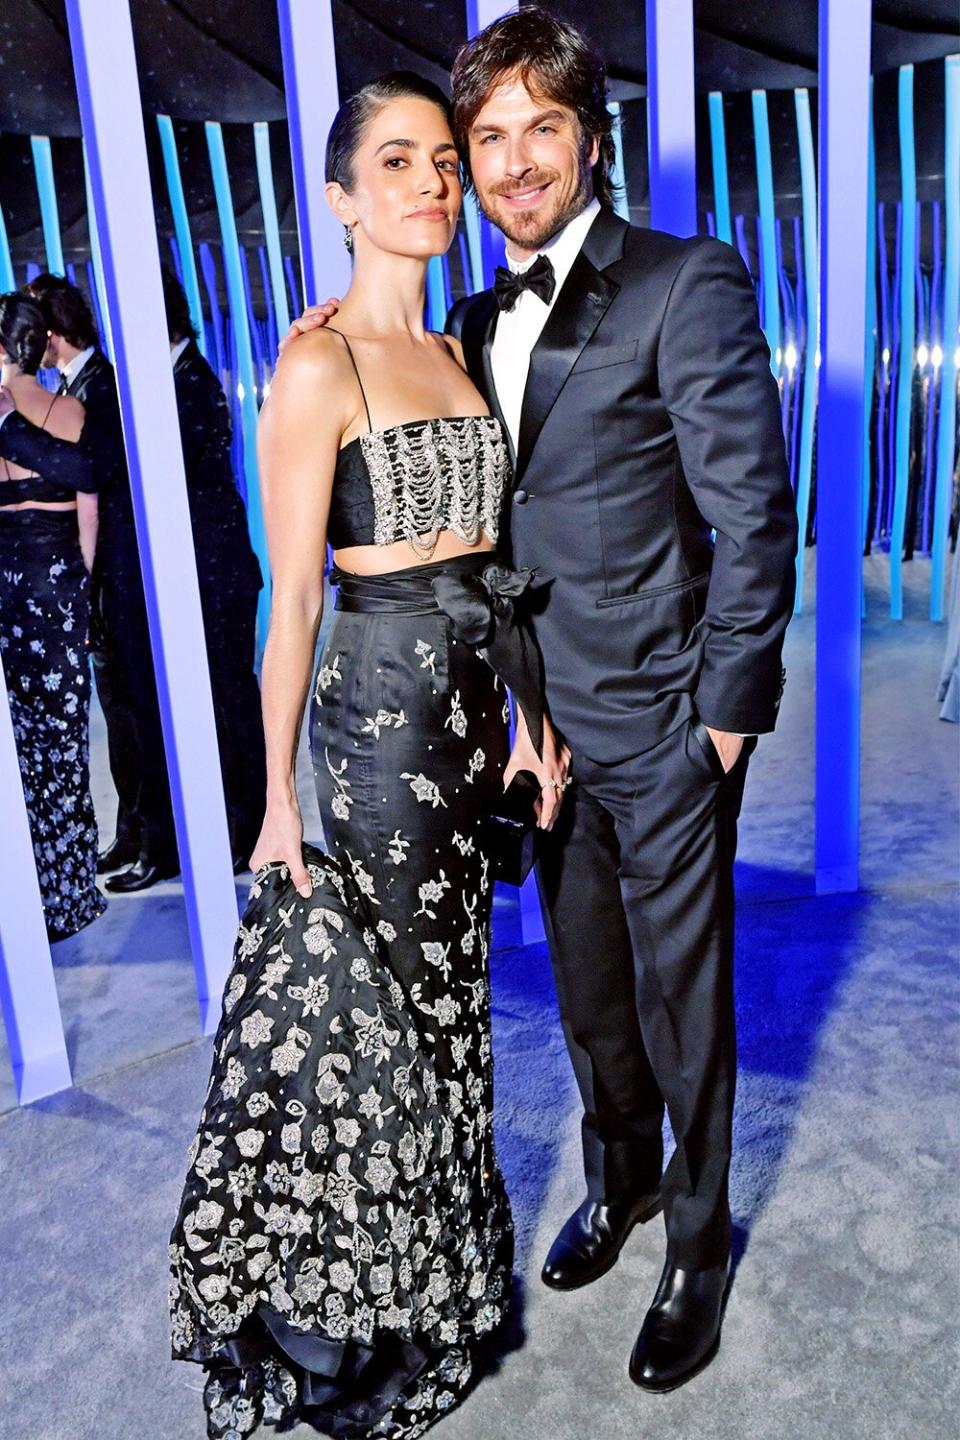 BEVERLY HILLS, CALIFORNIA - FEBRUARY 09: (L-R) Nikki Reed and Ian Somerhalder attend the 2020 Vanity Fair Oscar Party hosted by Radhika Jones at Wallis Annenberg Center for the Performing Arts on February 09, 2020 in Beverly Hills, California. (Photo by Emma McIntyre /VF20/WireImage)